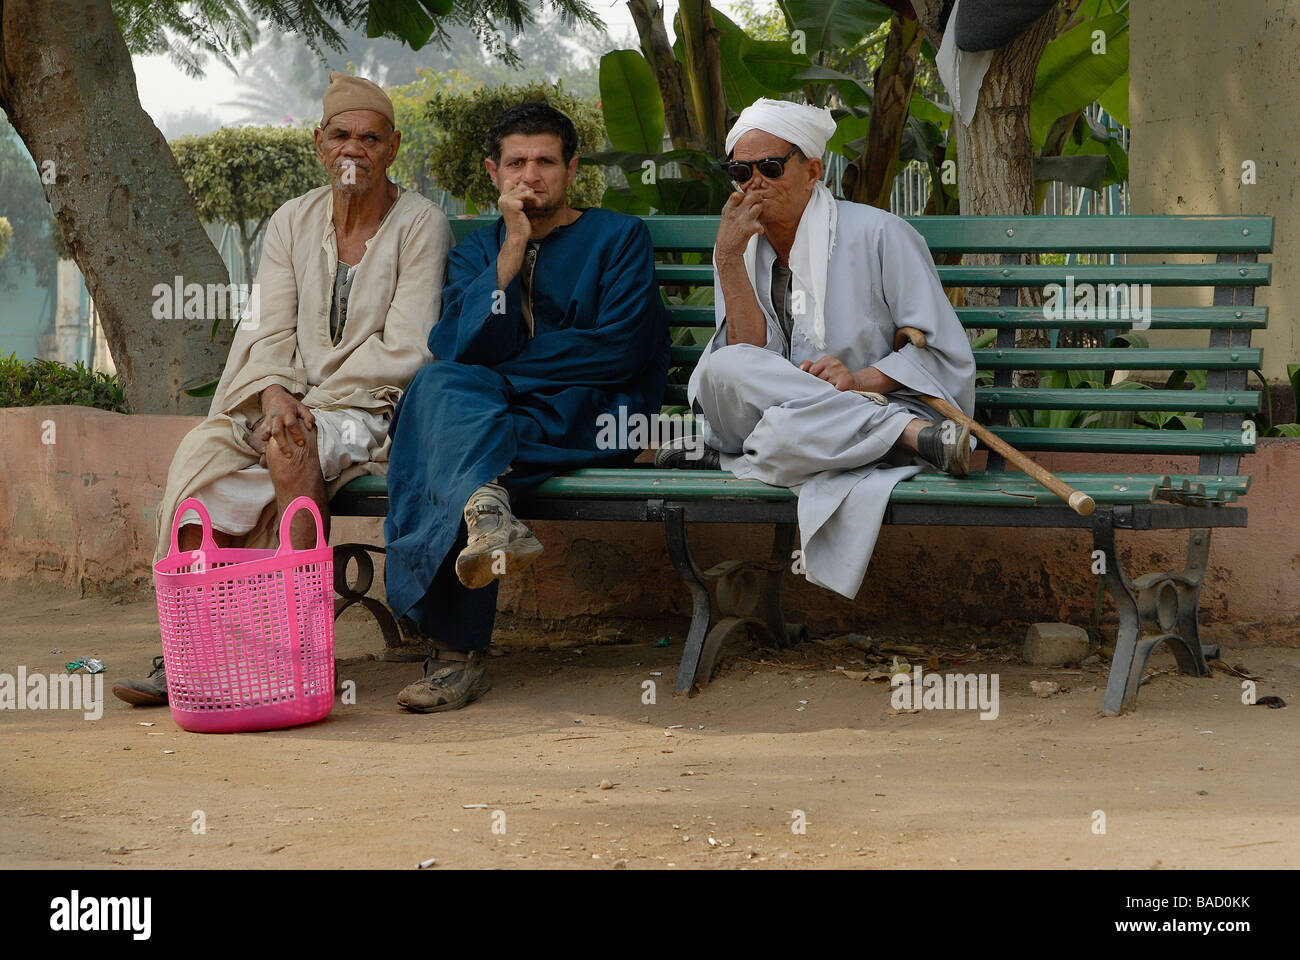 Three leprosy patients in Egypt's leprosy colony Abu Zaabal are chilling in the hospital garden Stock Photo